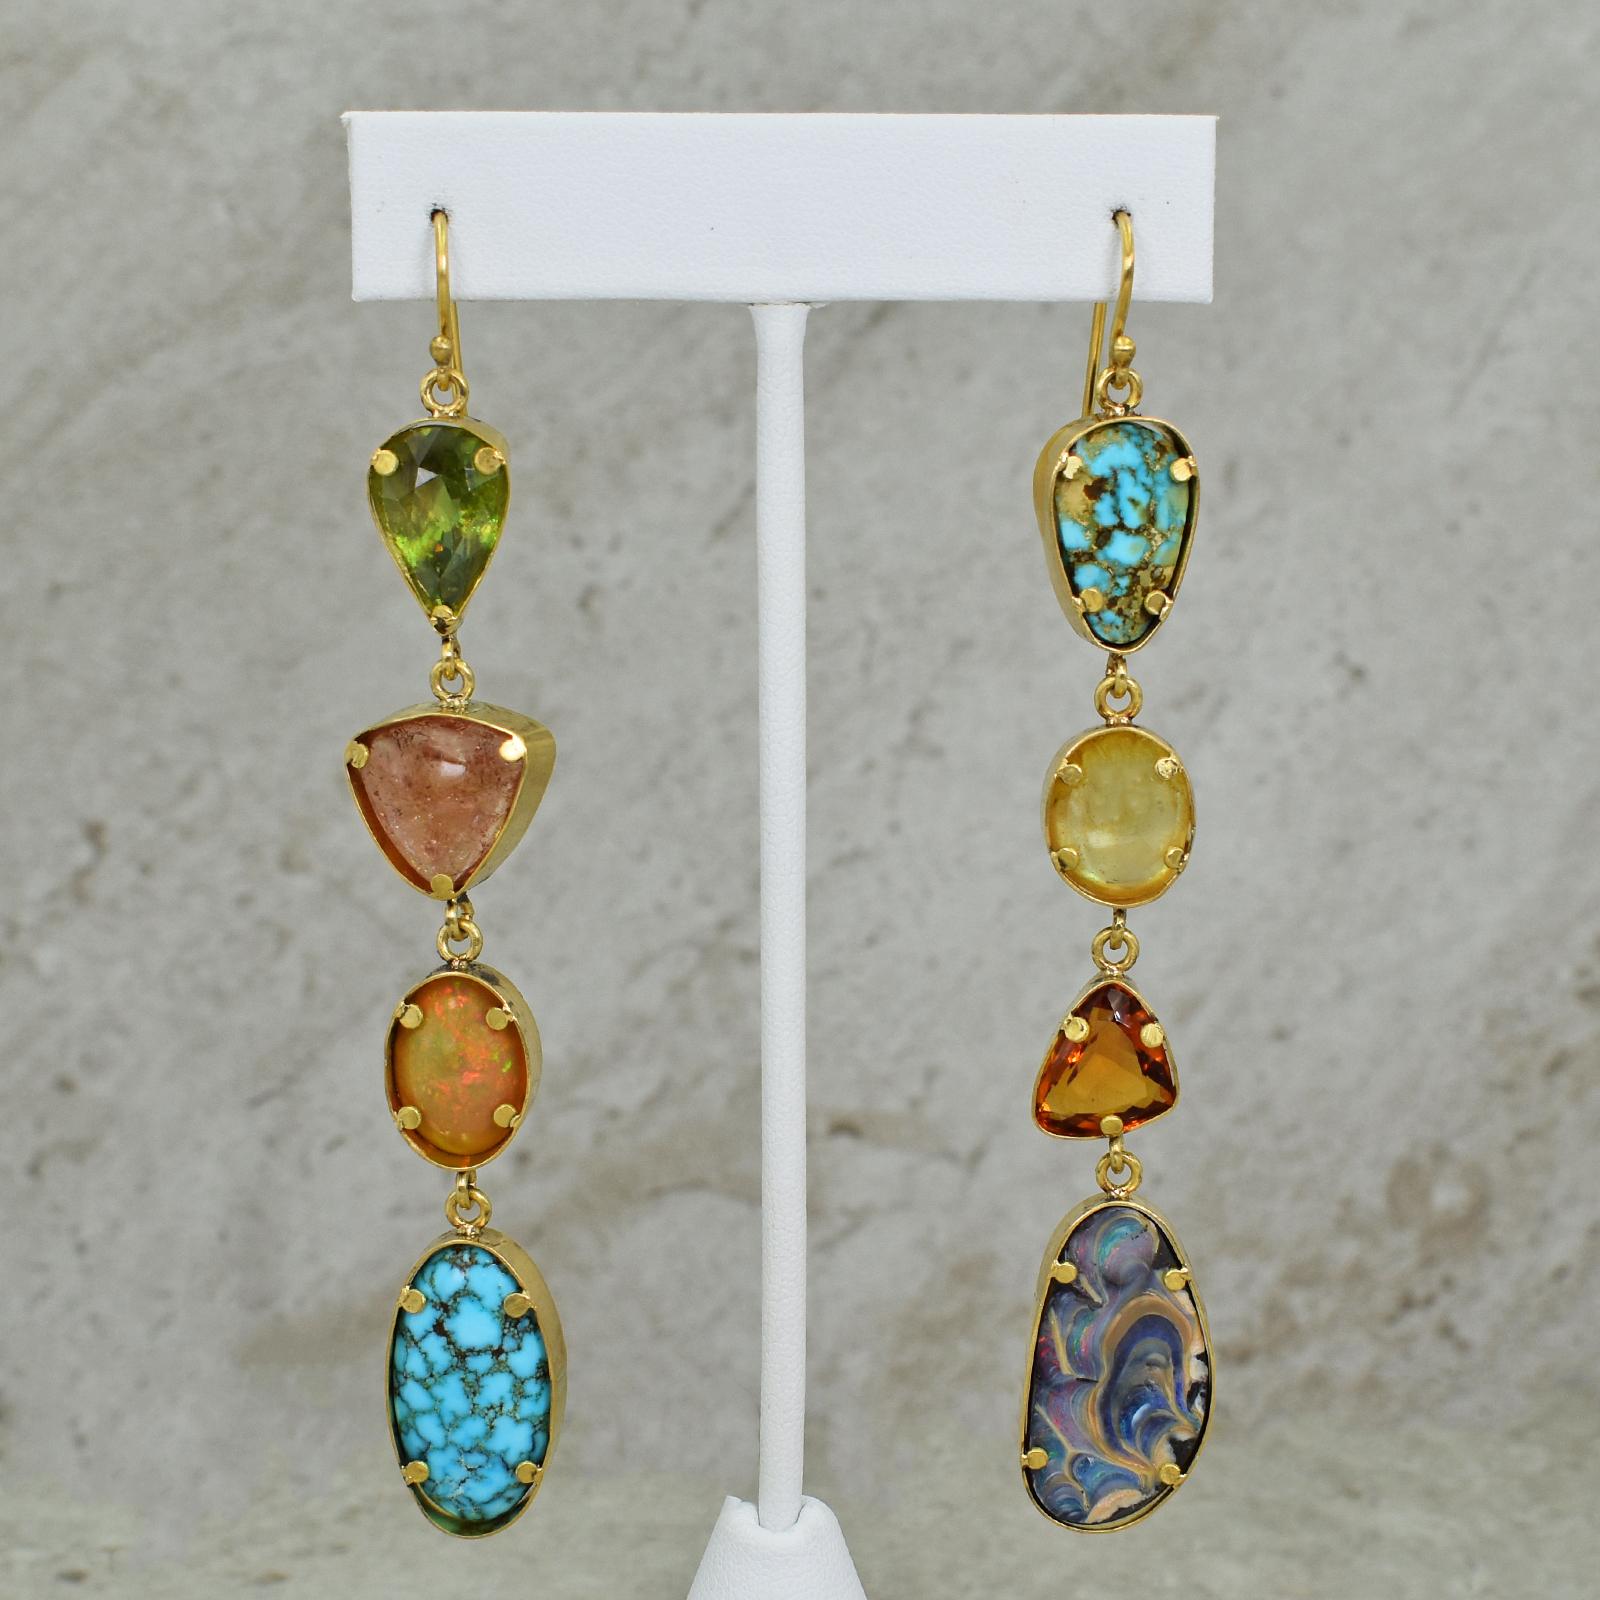 Contemporary Tourmaline, Turquoise, Opal and Citrine Multi-Gemstone 22k Gold Dangle Earrings